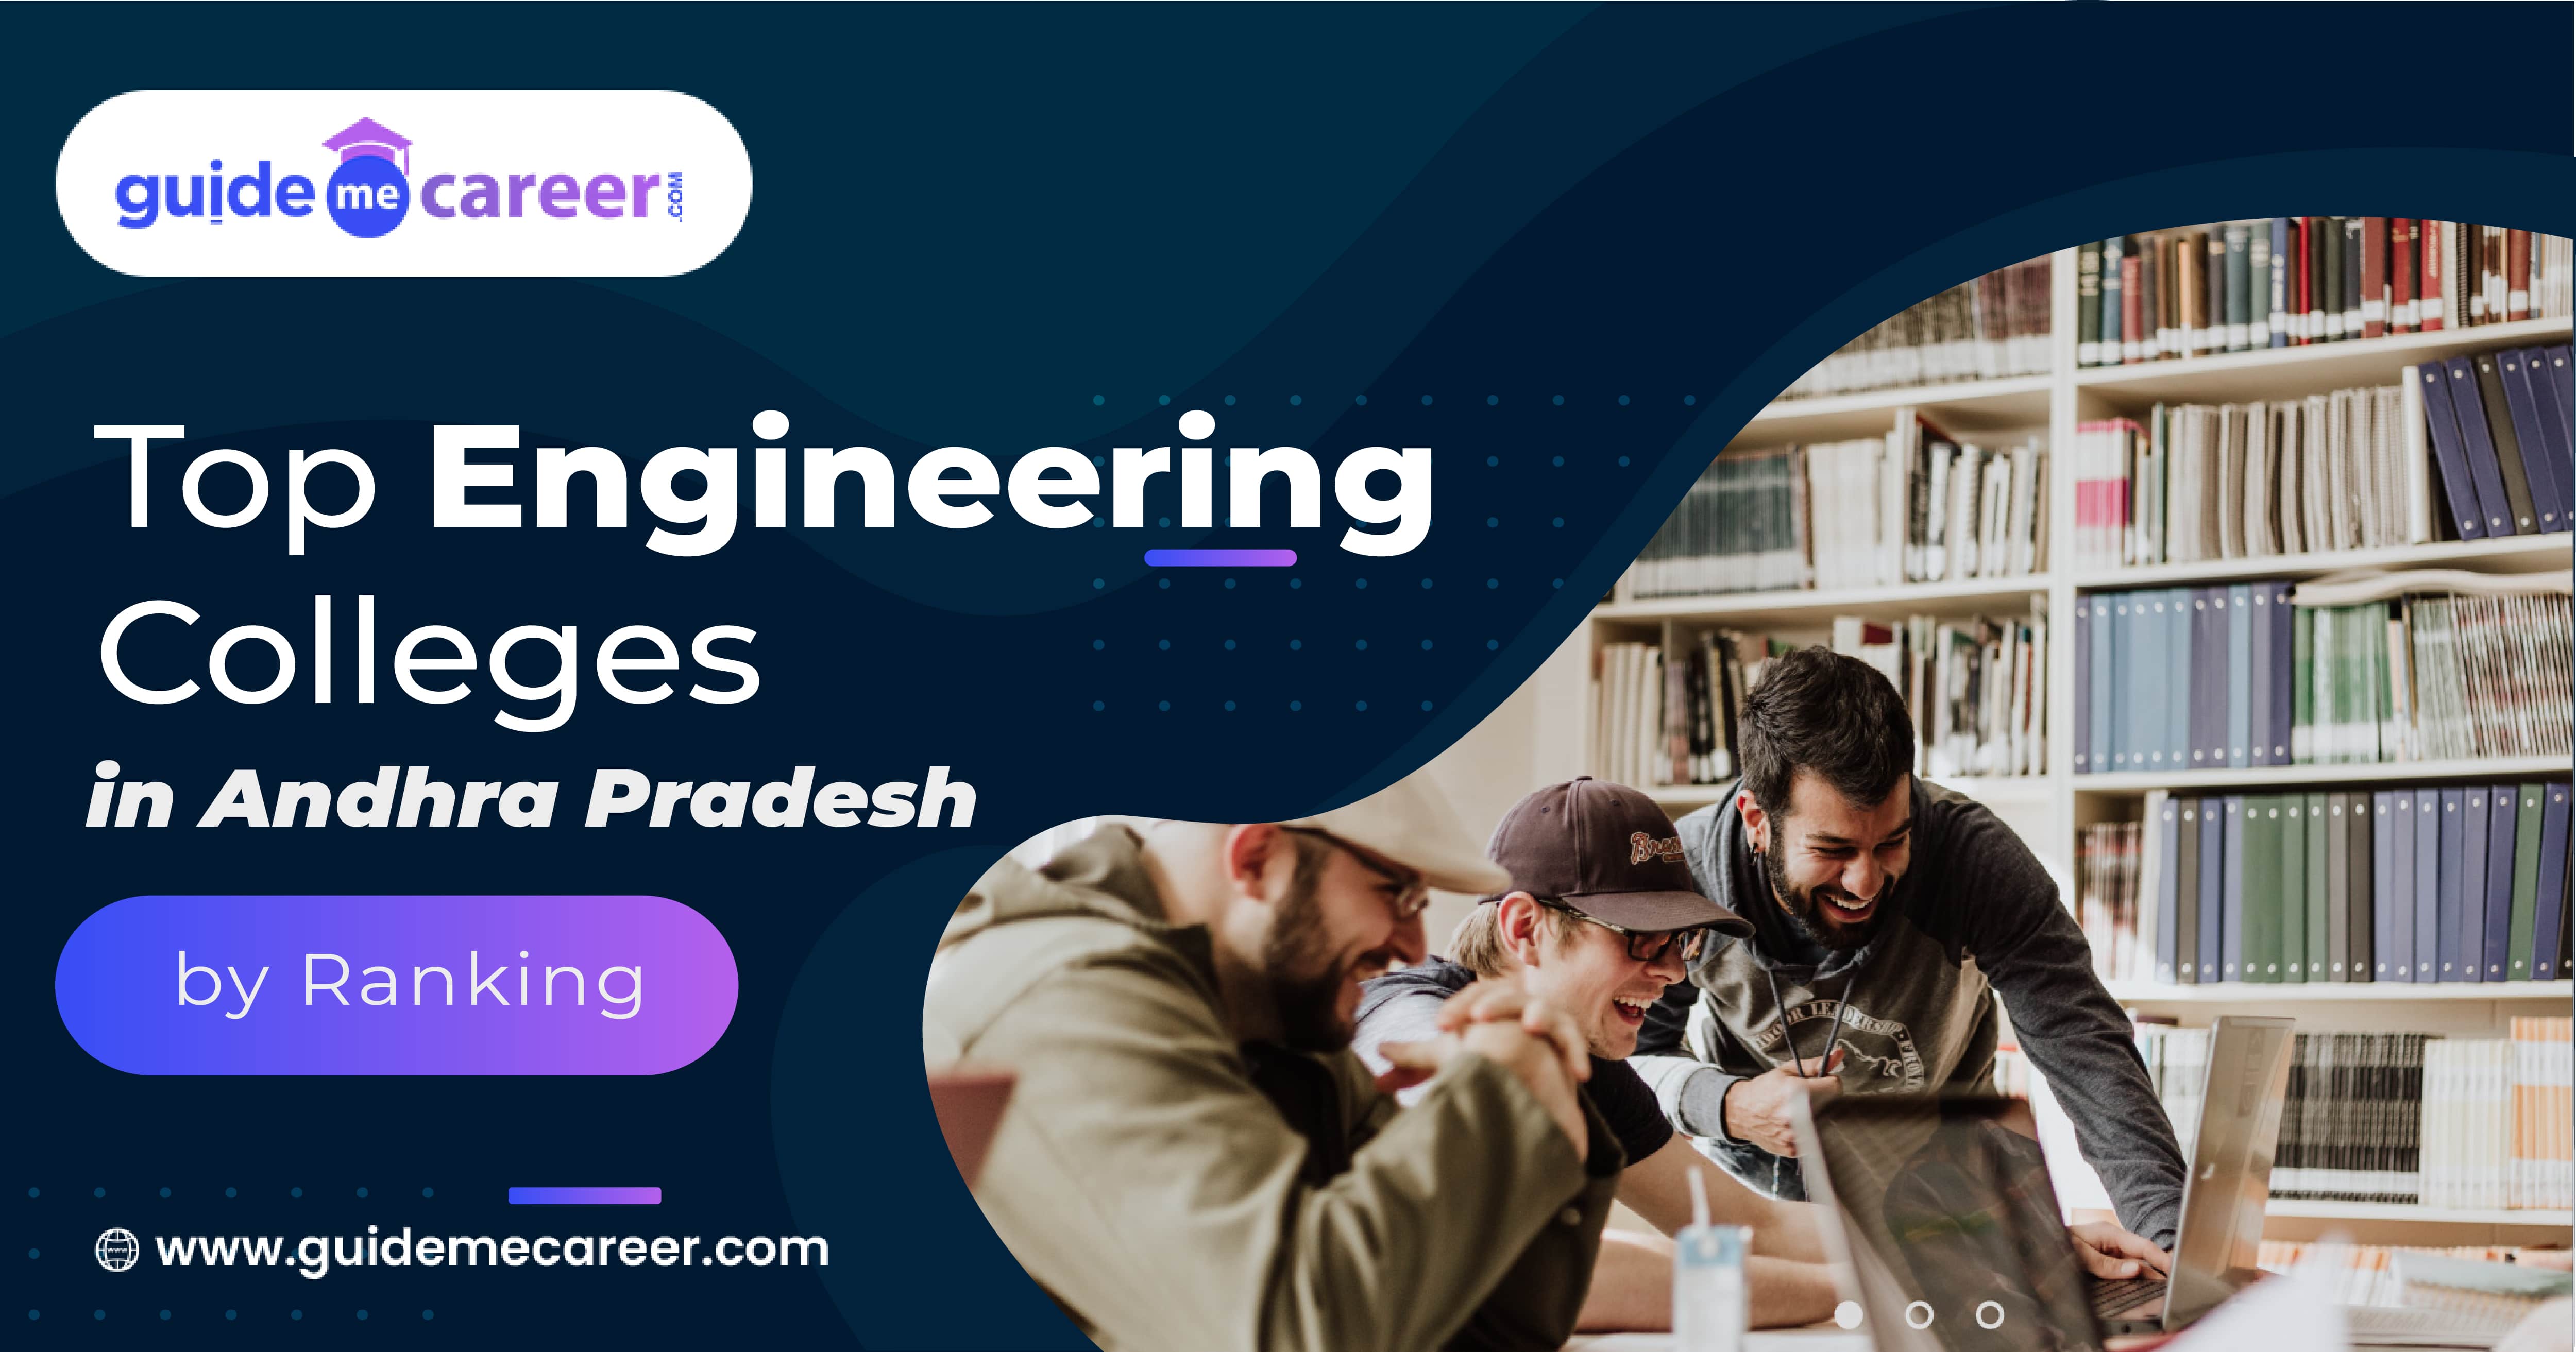 List of the Top Engineering Colleges in Andhra Pradesh by Ranking 